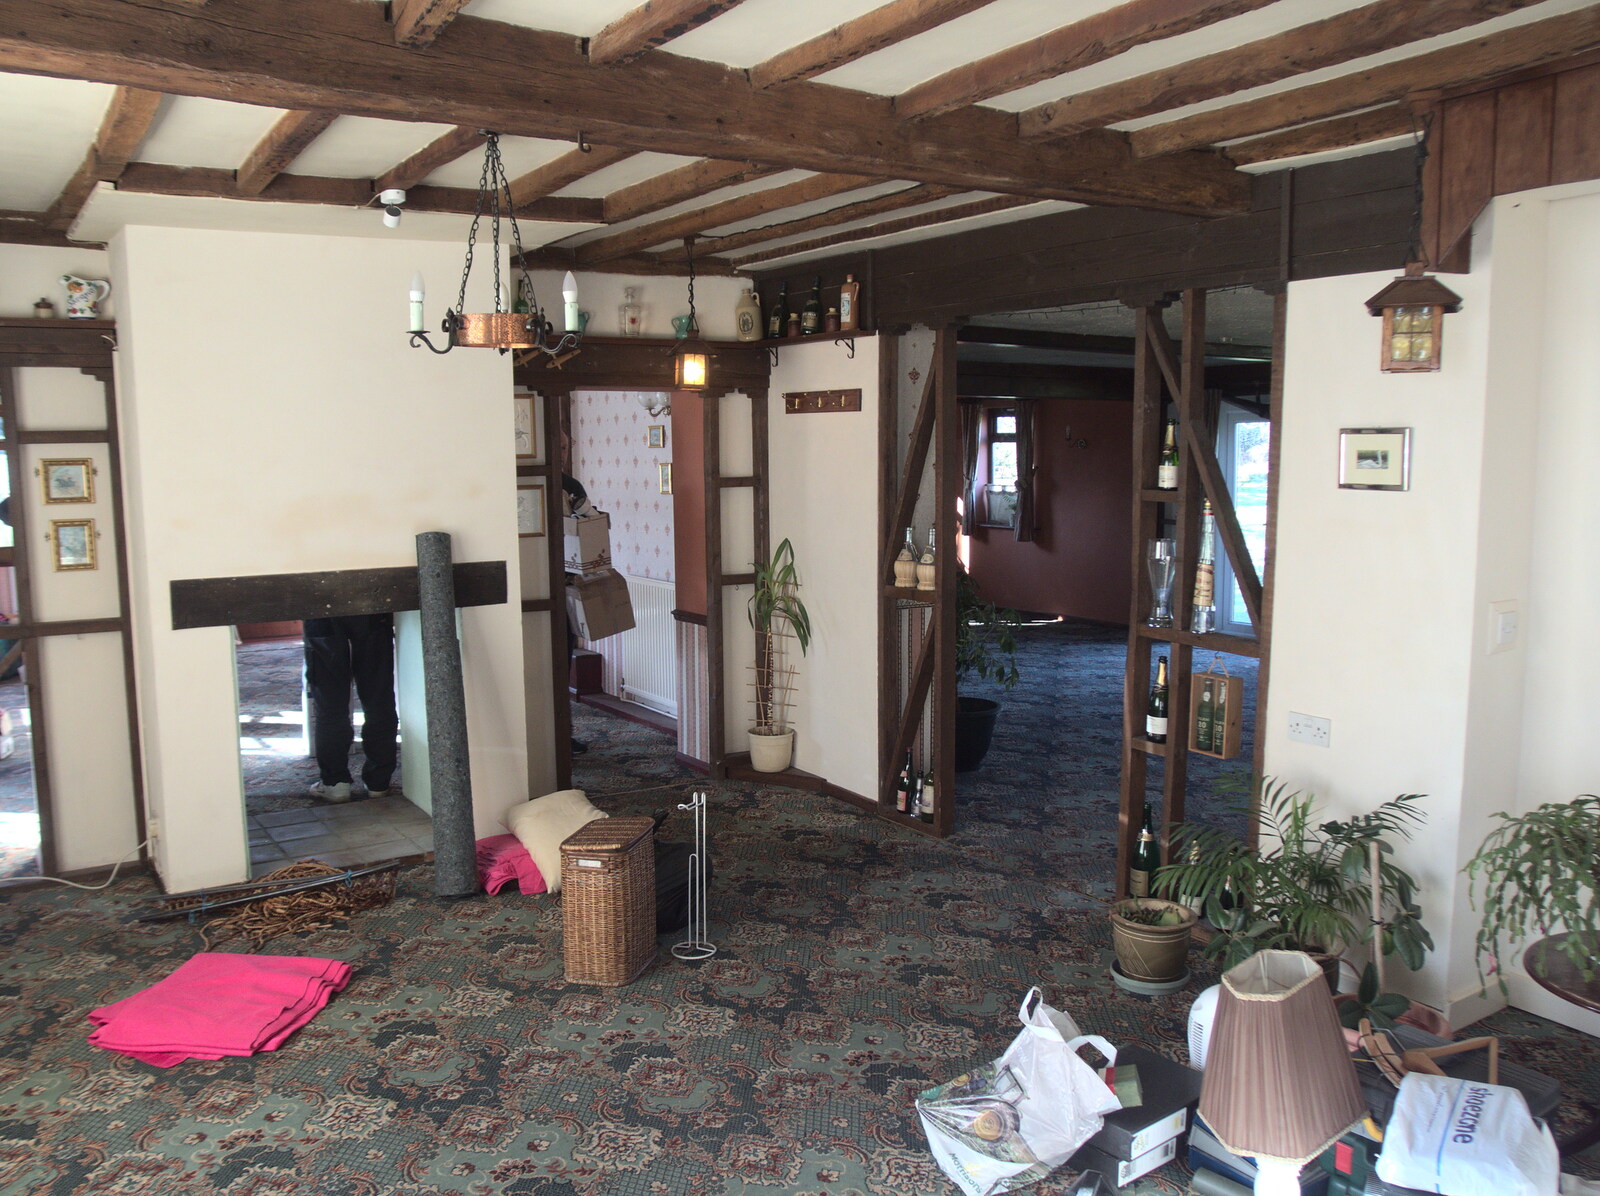 The family room and restaurant from The Swan Inn: An Epilogue, Brome, Suffolk - 17th February 2022